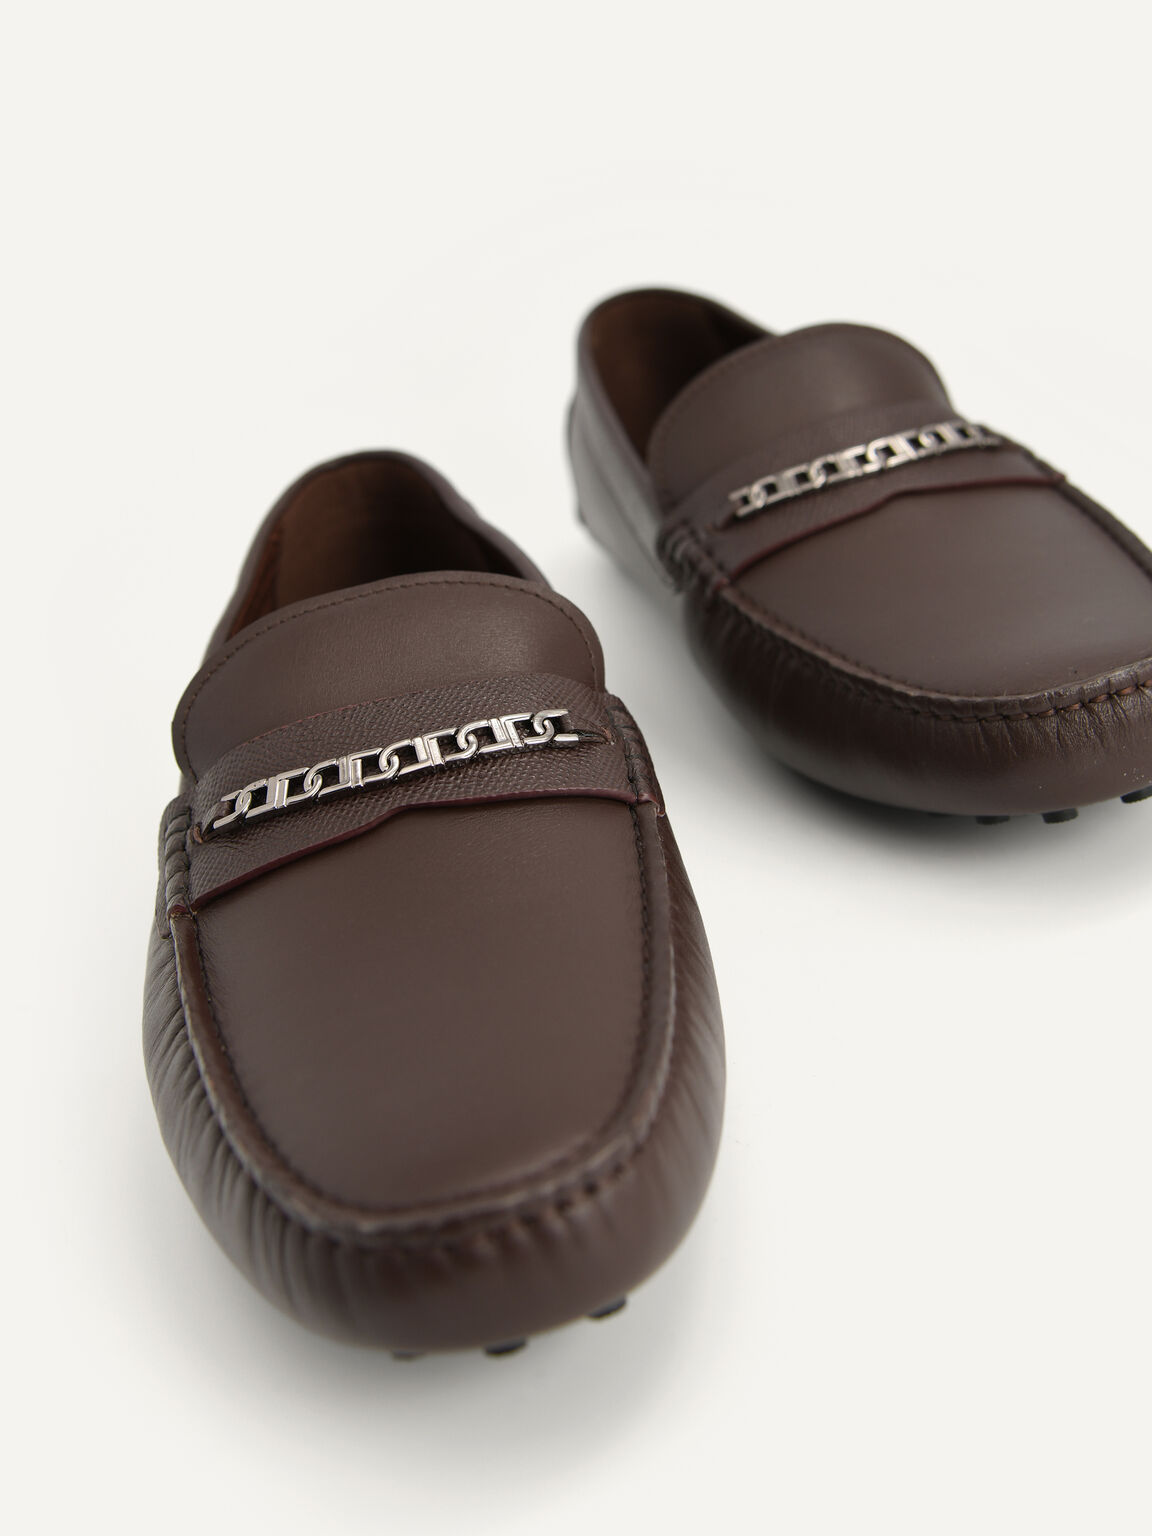 Icon leather Moccasins, Dark Brown